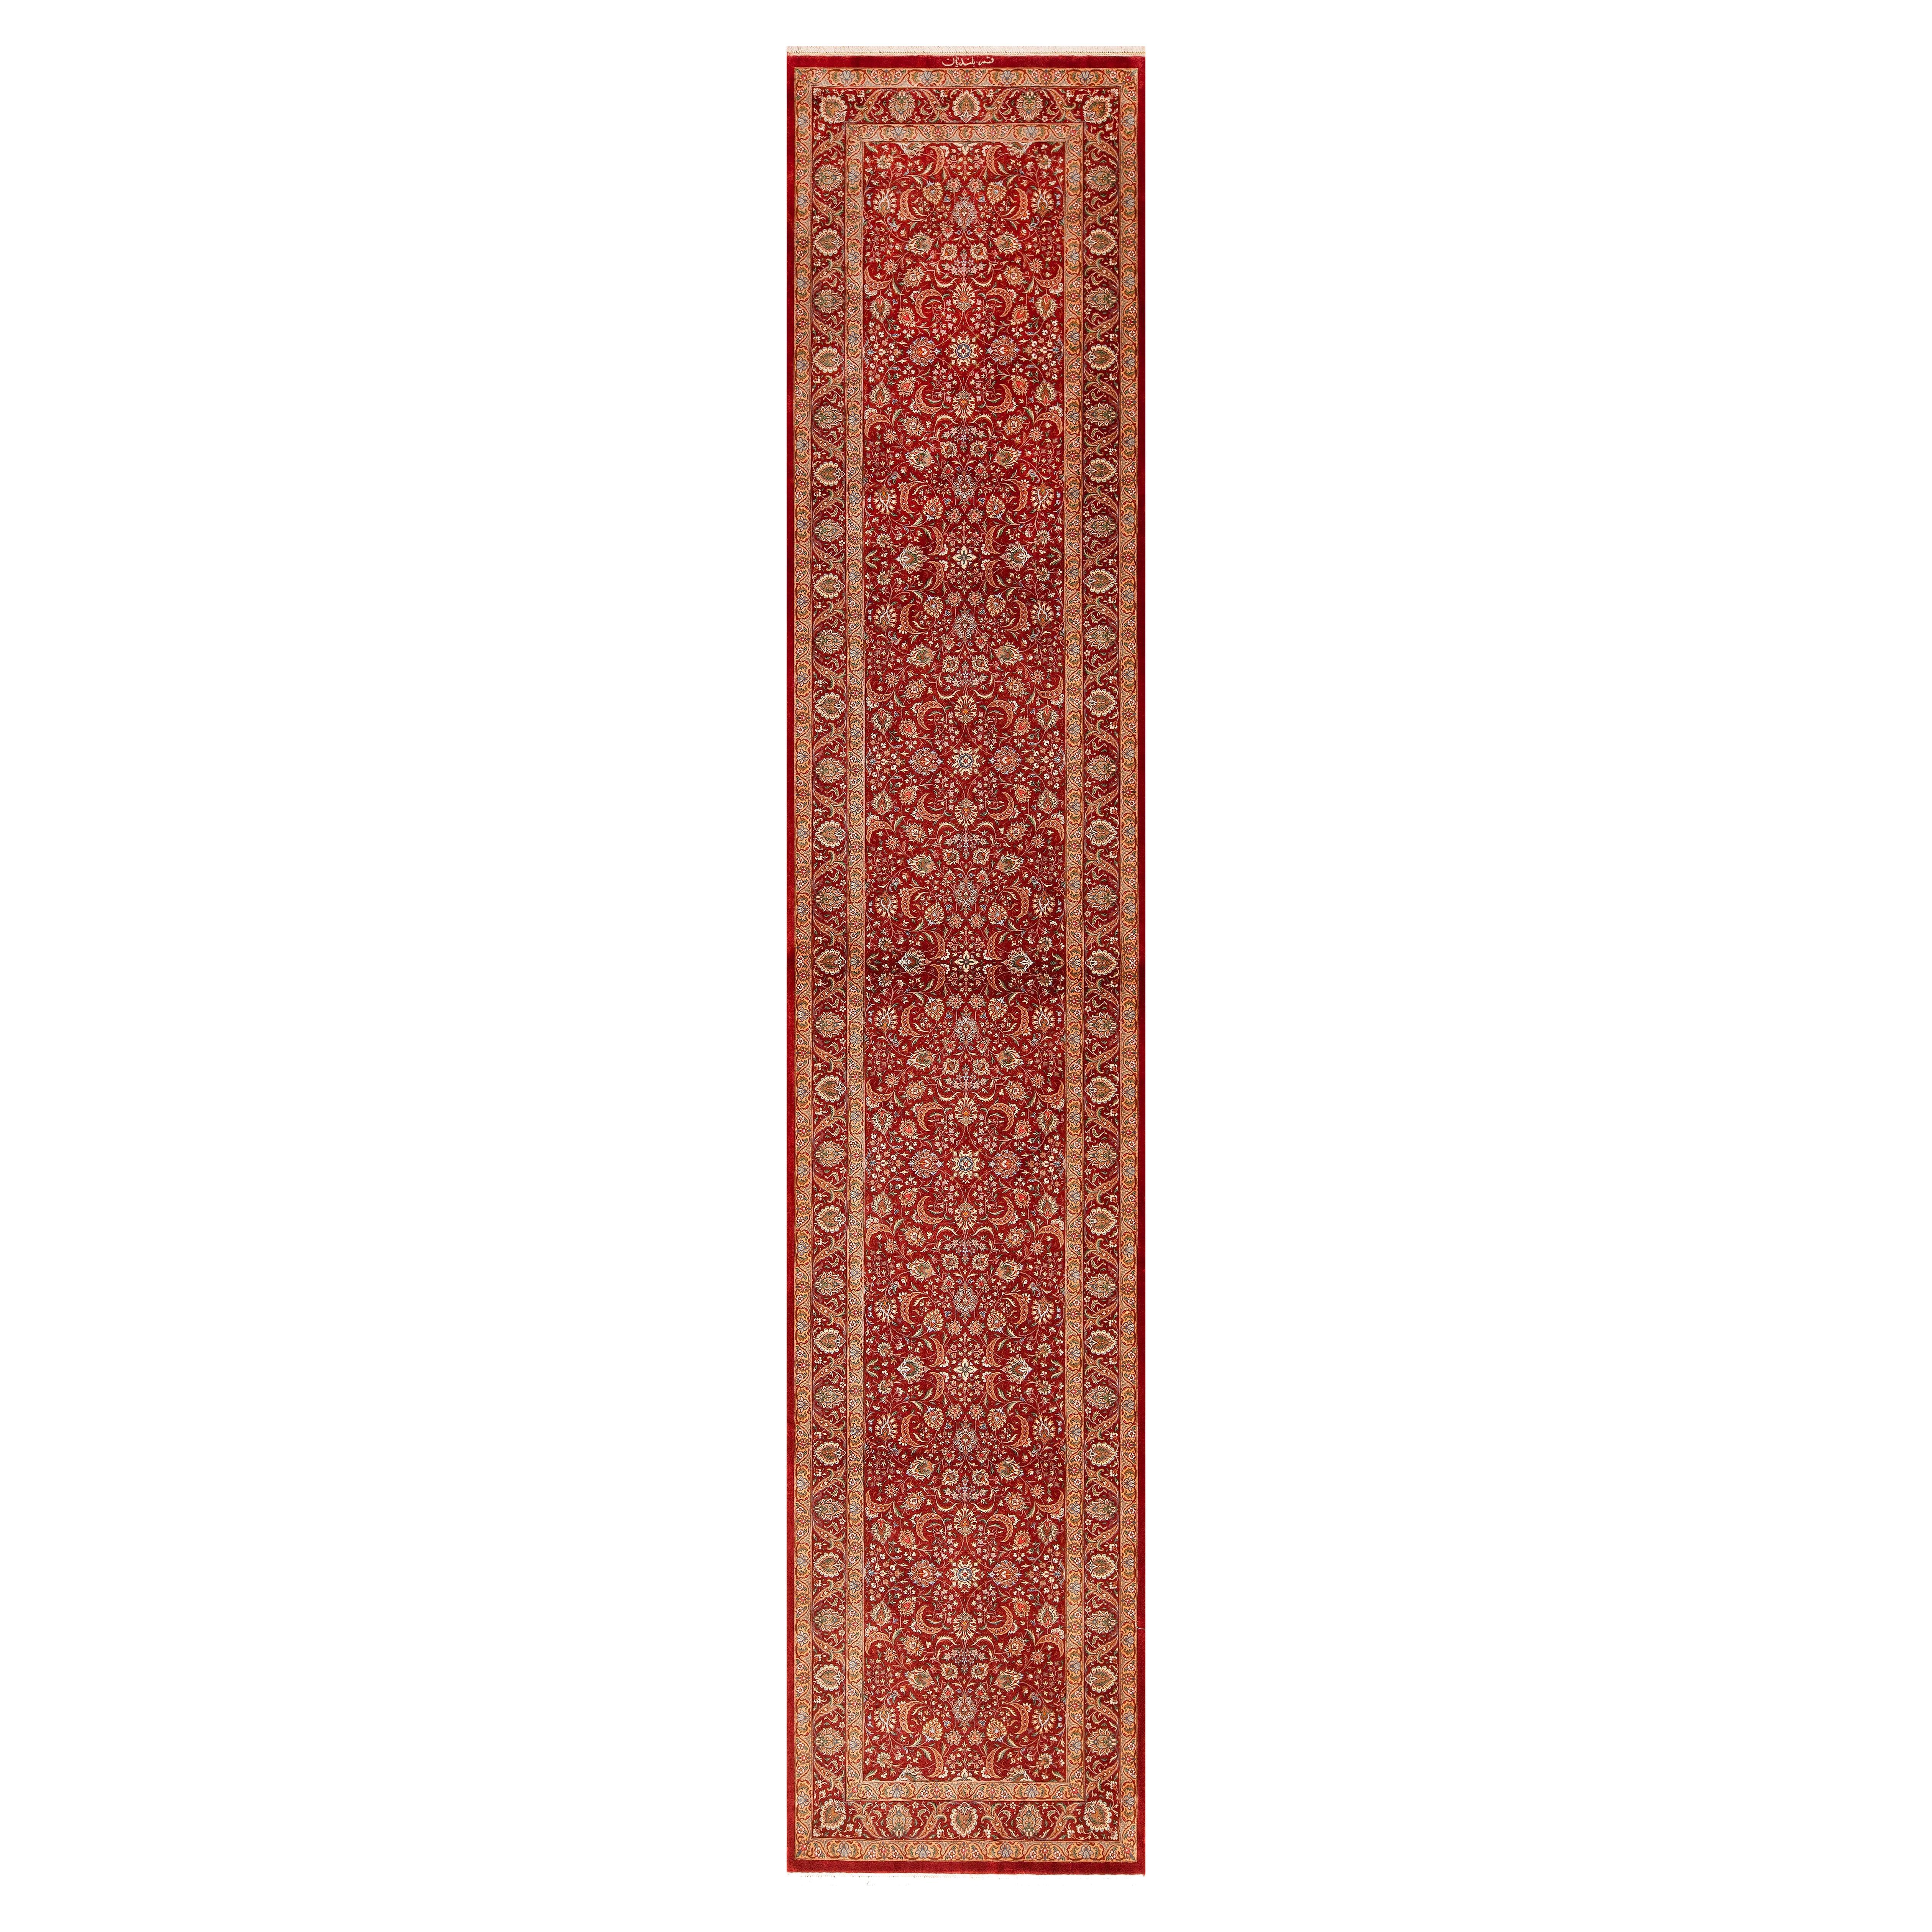 Red Fine Floral Luxurious Vintage Persian Qum Silk Runner Rug 2'9" x 13'7" For Sale